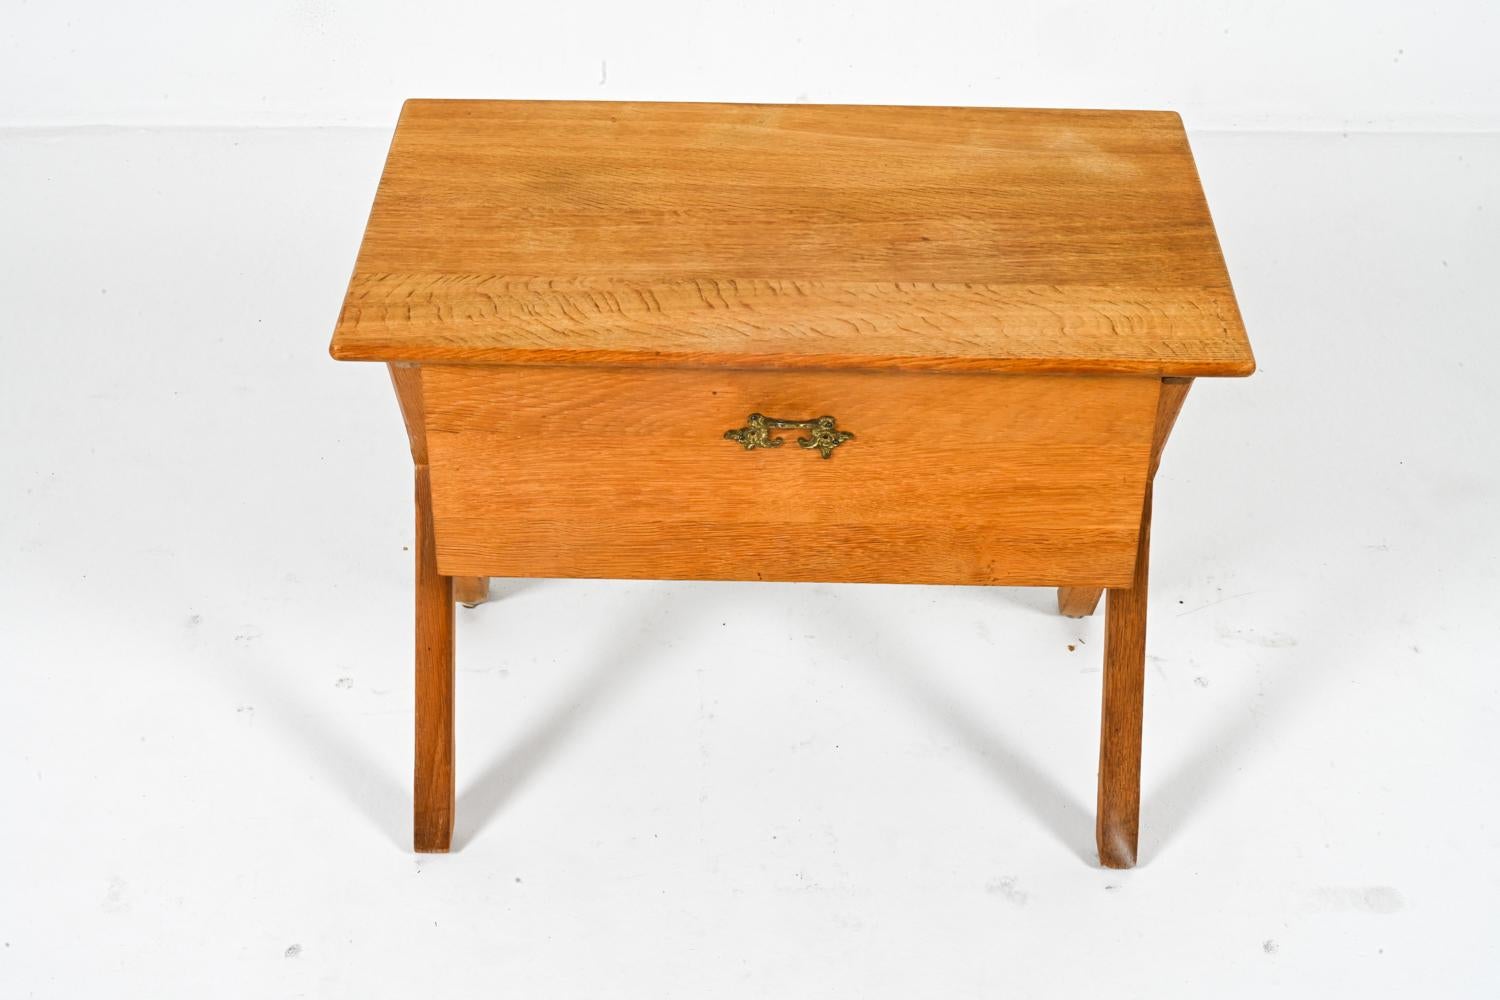 This Danish sewing table exemplifies the perfect marriage of form and function that characterized Mid-Century Modern design in the 1960's. Crafted from warm, honeyed oak, this table boasts bold lines and a timeless elegance that will effortlessly